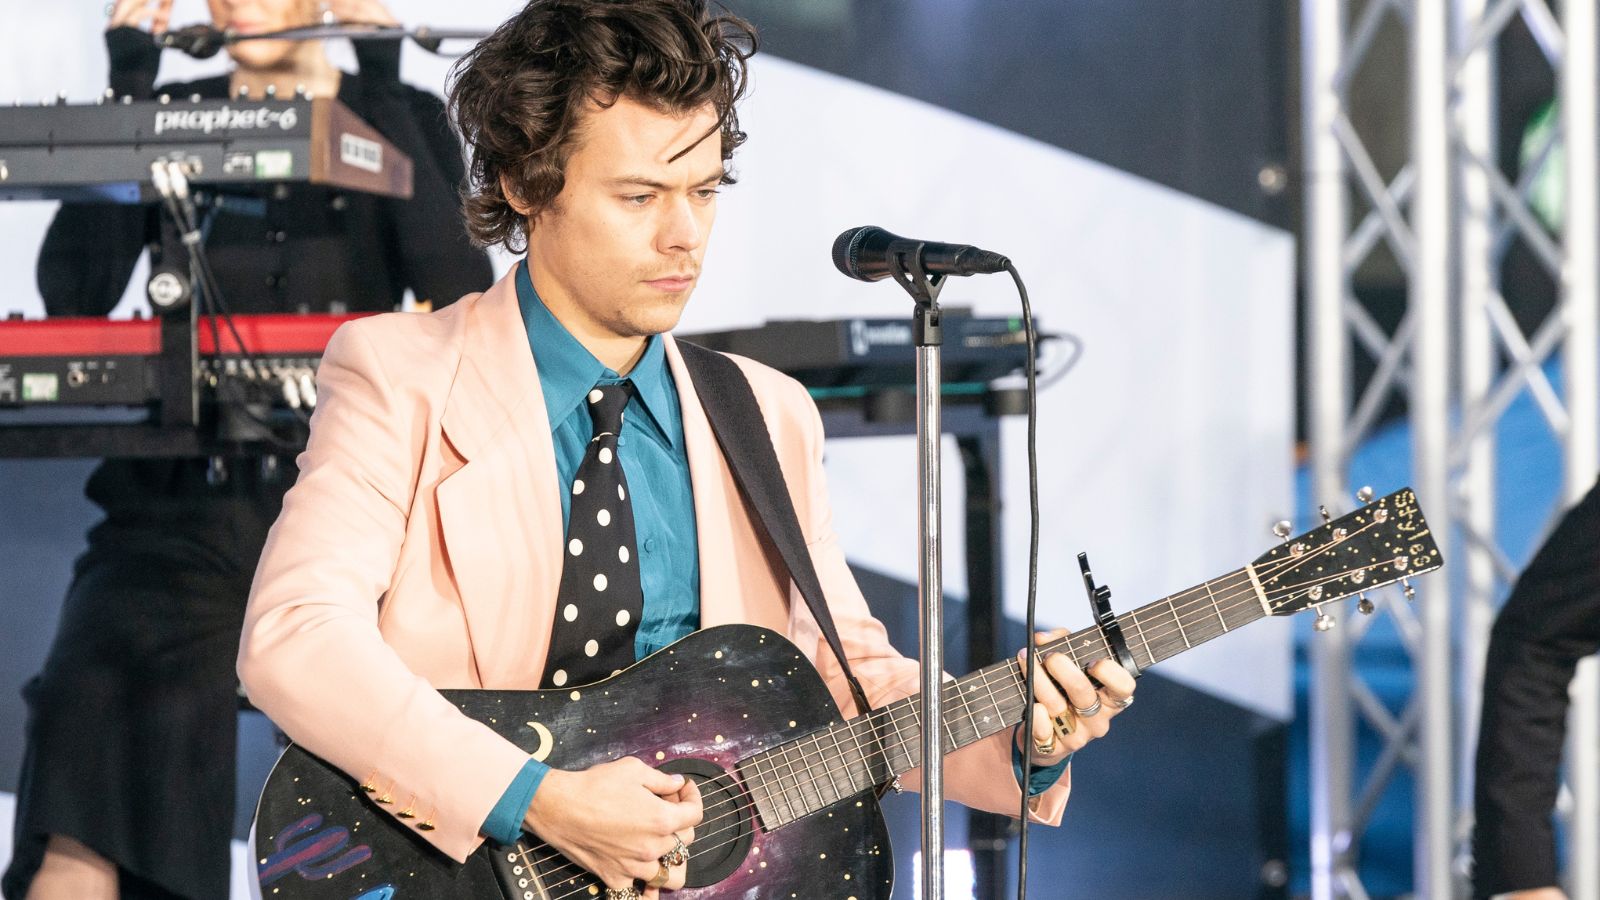 New York, NY - February 26, 2020: Singer Harry Styles performs on stage during Citi Concert Series on NBC TODAY SHOW at Rockefeller Plaza